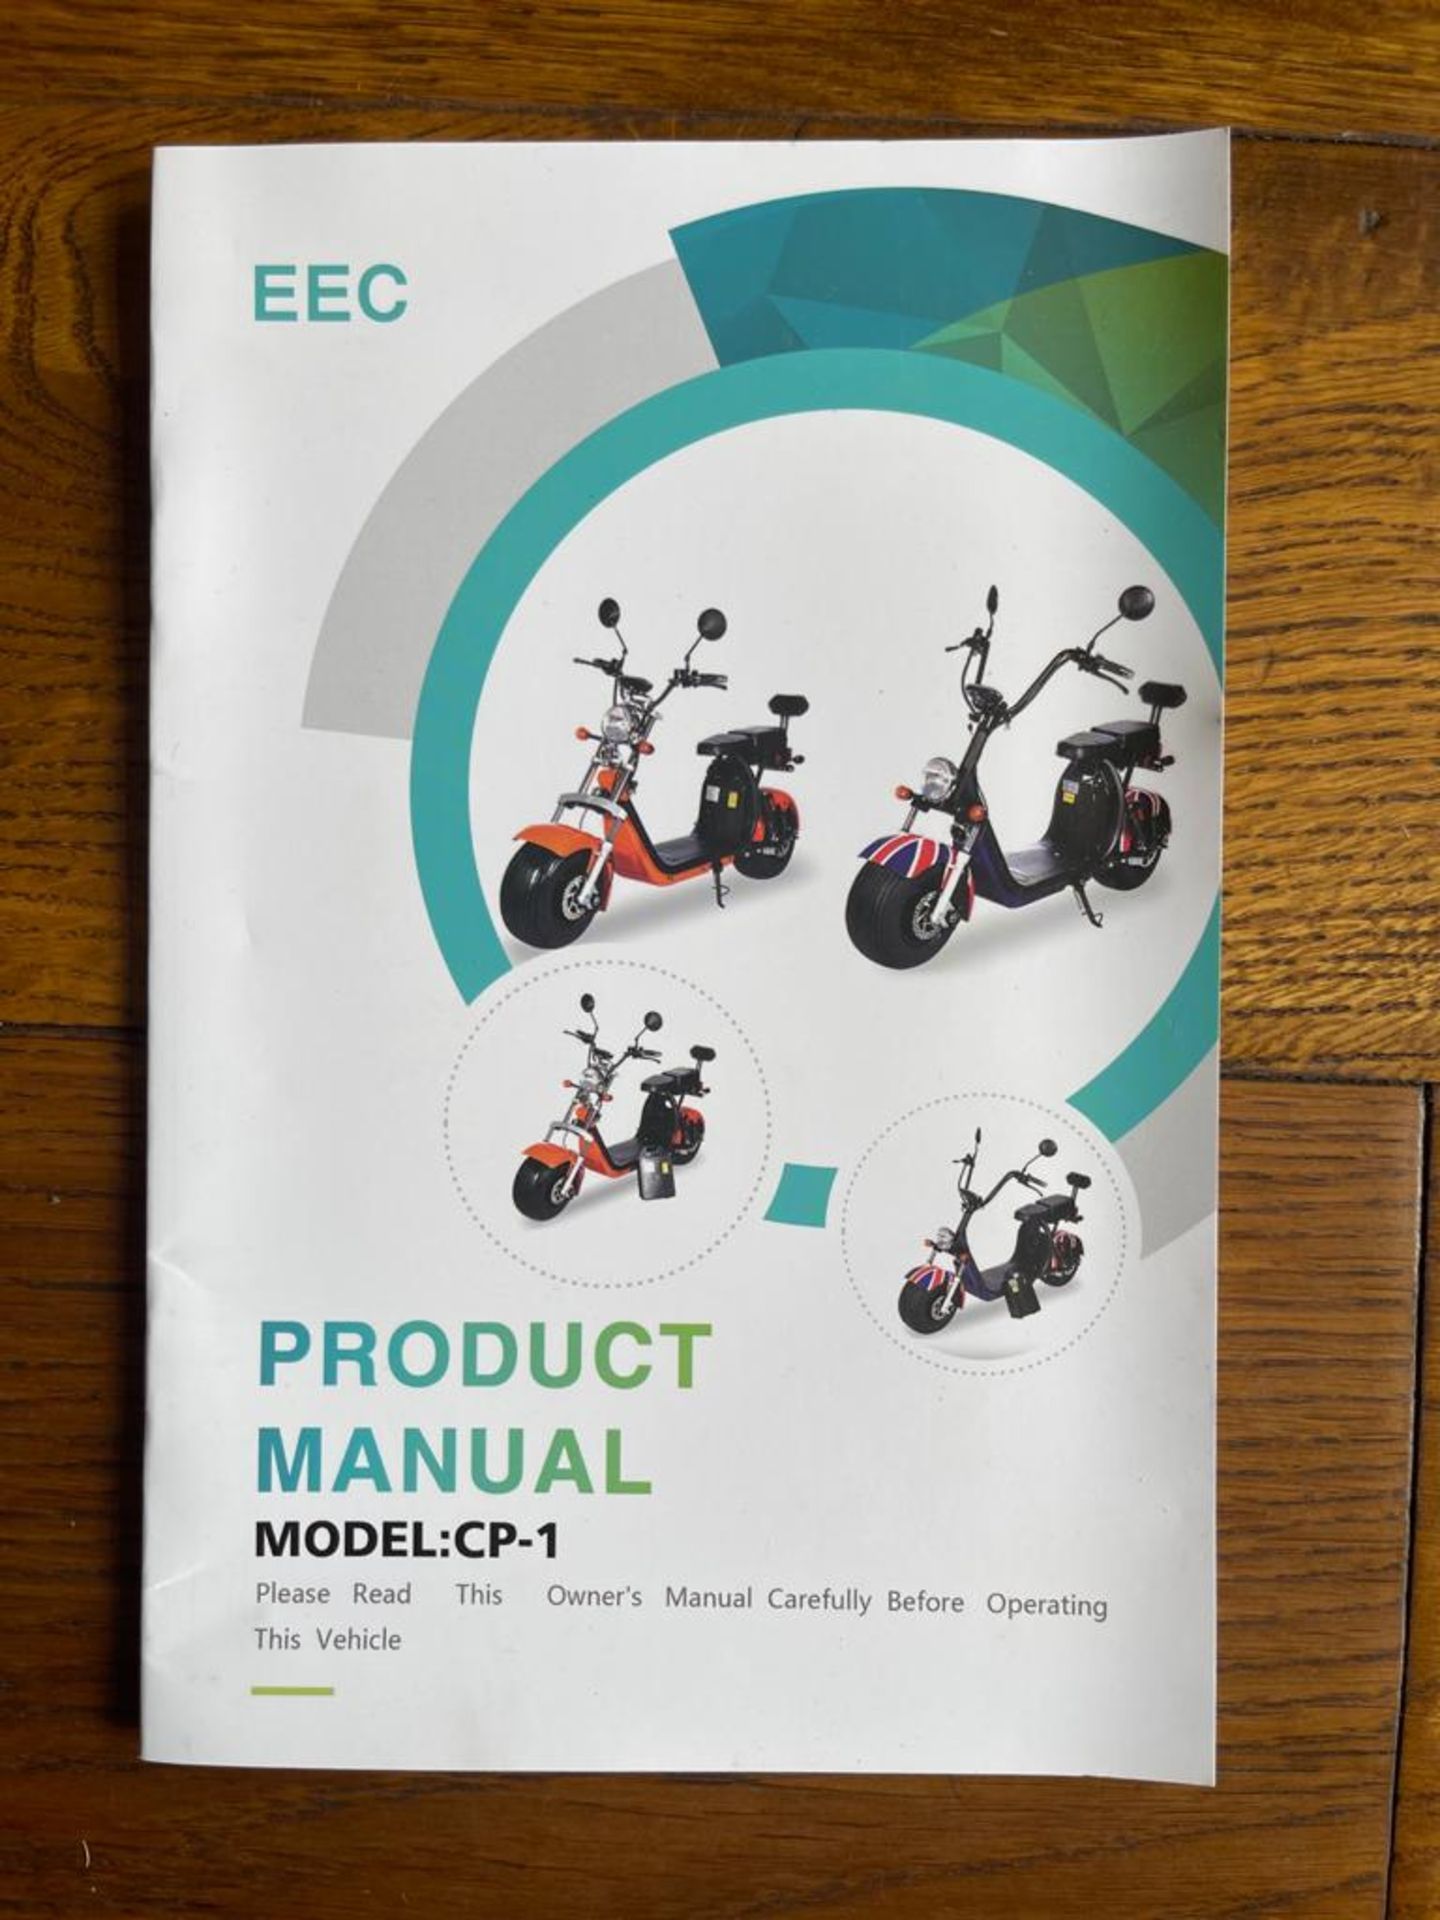 NEW ELECTRIC SCOOTER, WIDE FATBOY TYRES, 1500W 60V 45km/h, CAN BE ROAD REGISTERED *PLUS VAT* - Image 14 of 18